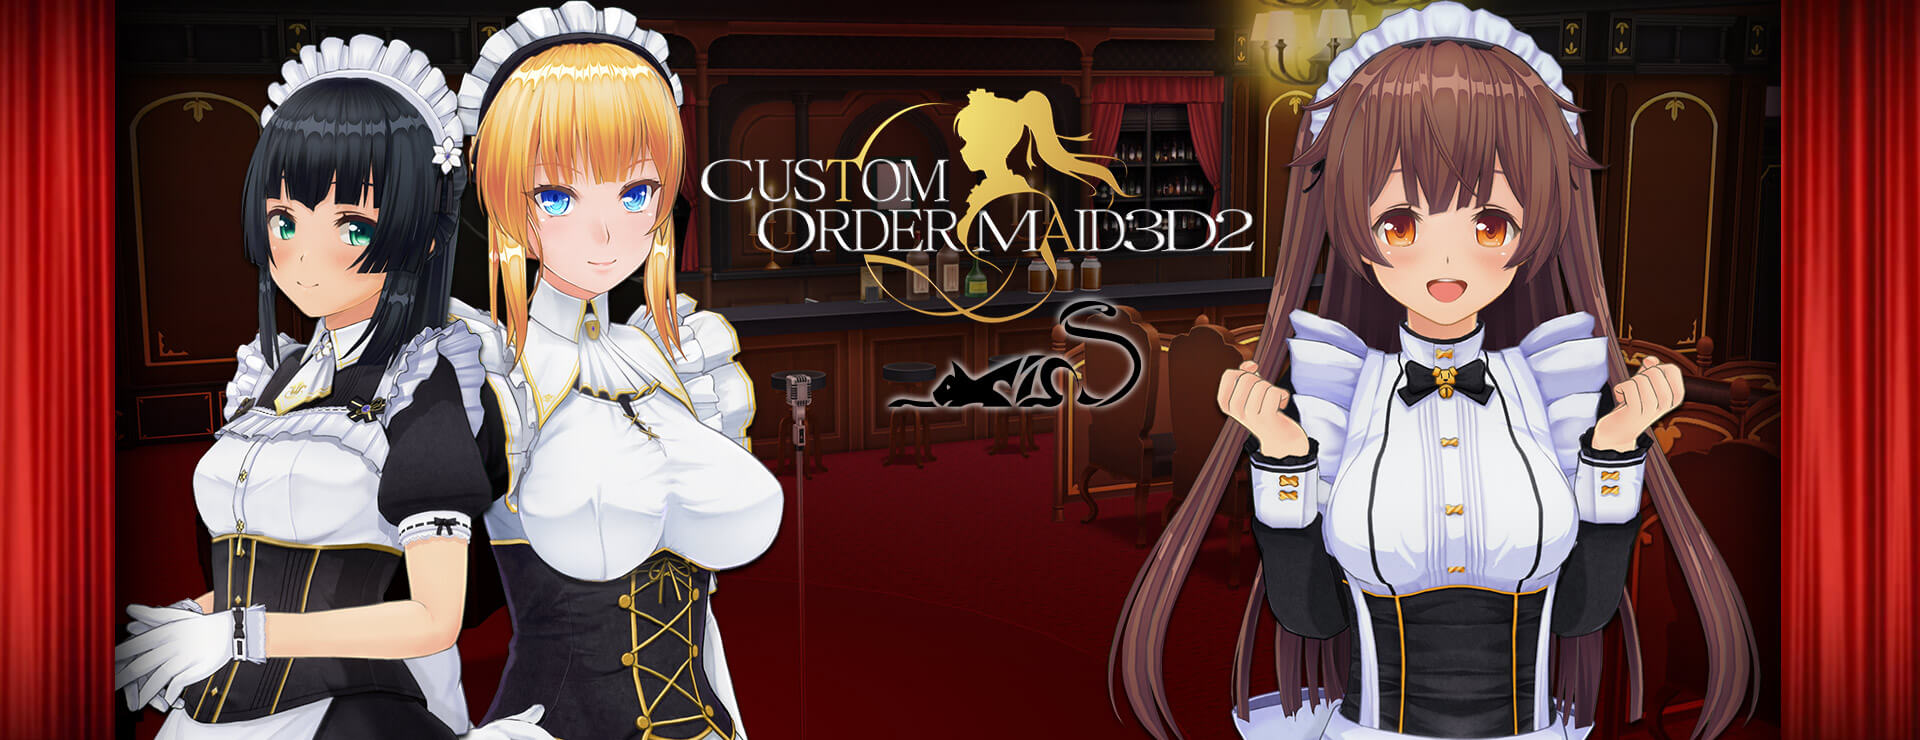 Custom Order Maid 3D 2: Happy New Year Lucky Bag 2024 type Adult - Symulacja Gra